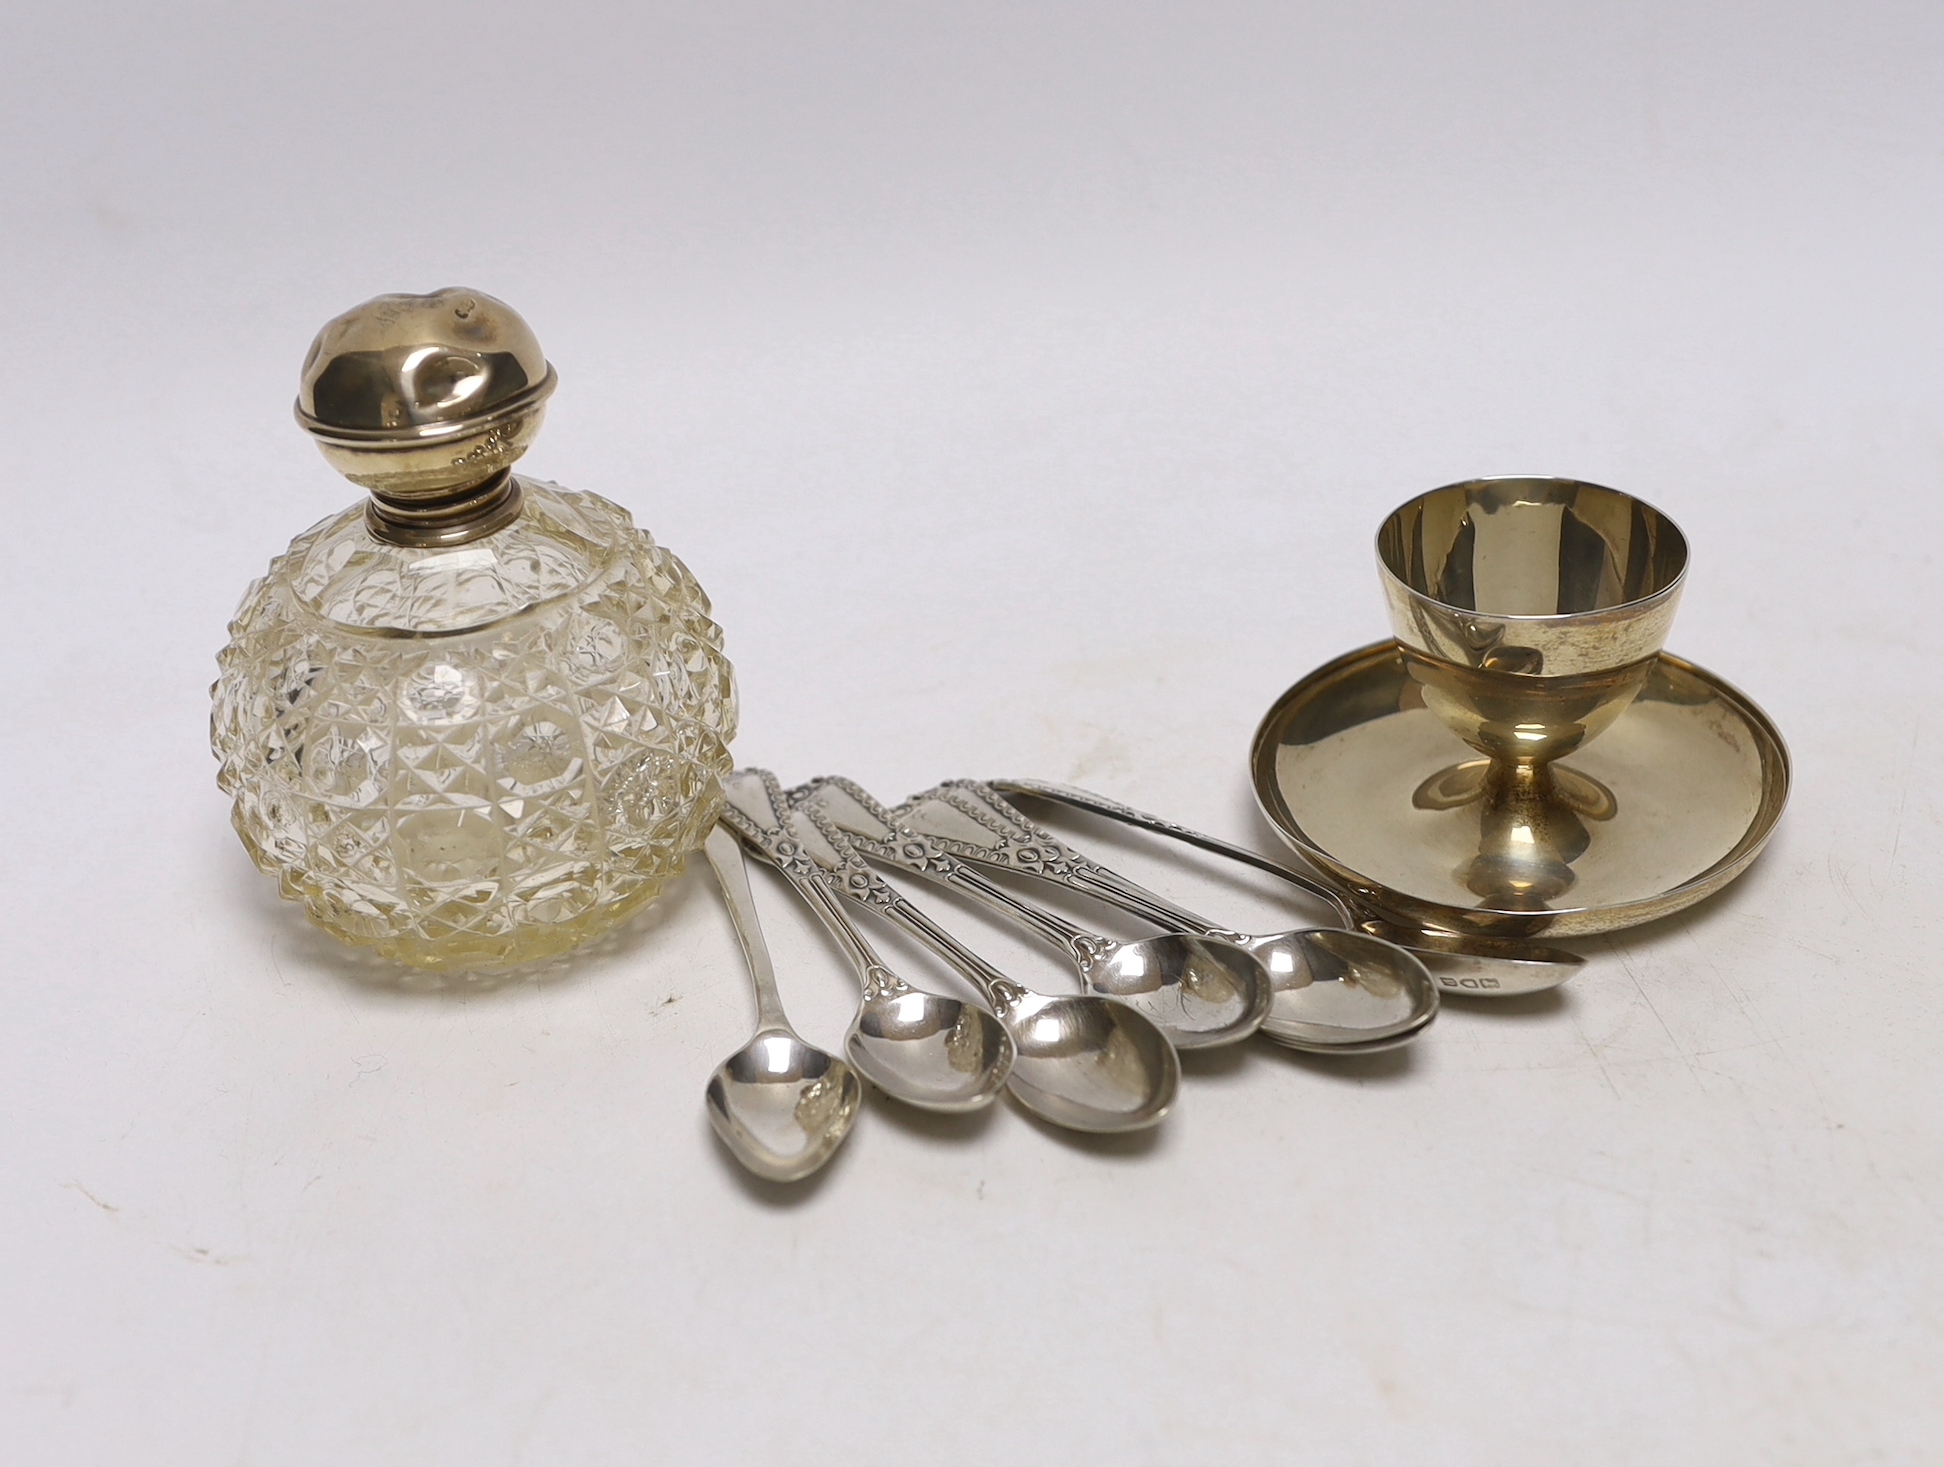 A set of six George V silver coffee spoons, Goldsmiths & Silversmiths Co Ltd, London, 1910, a similar silver Old English pattern coffee spoon, a silver egg cup and silver mounted glass toilet jar.